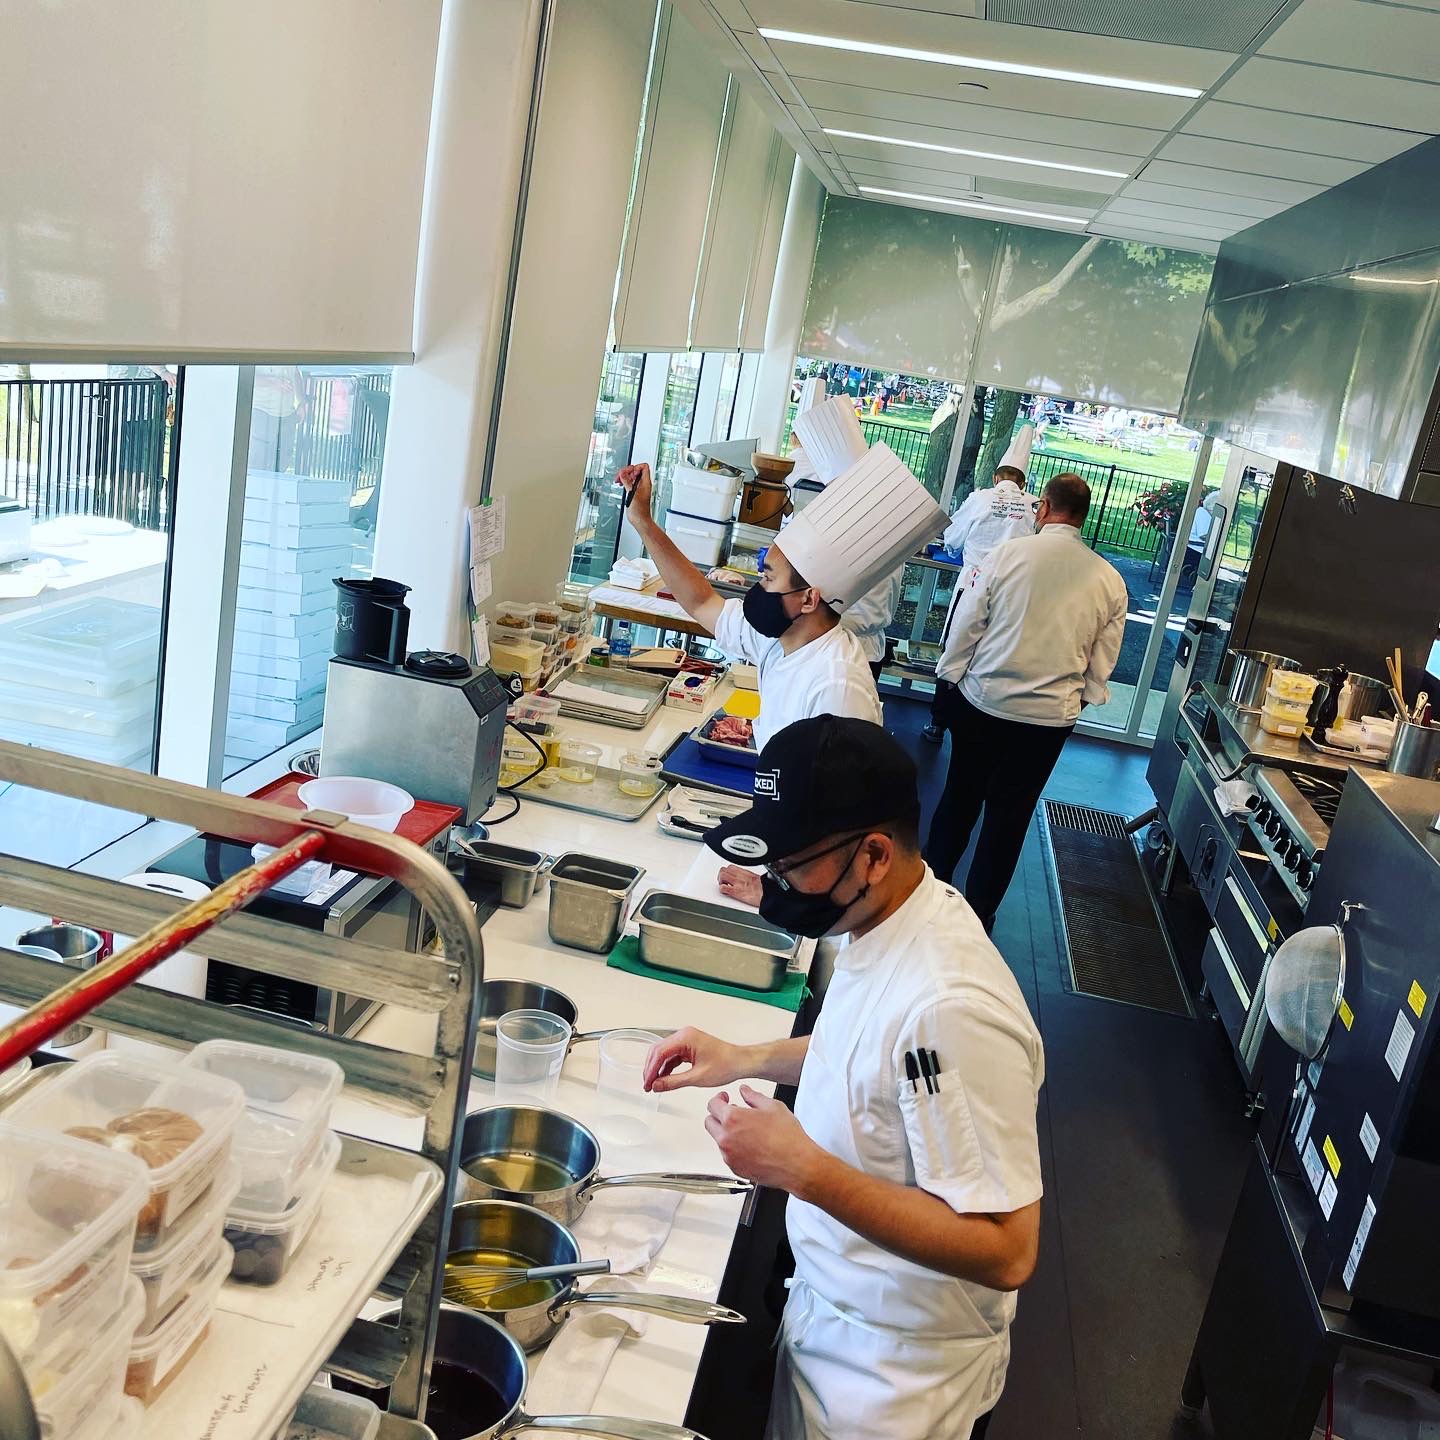 A team of chefs working in their whites are pictured in a kitchen, preparing food facing a window from inside the CFWI Aurora Armoury.